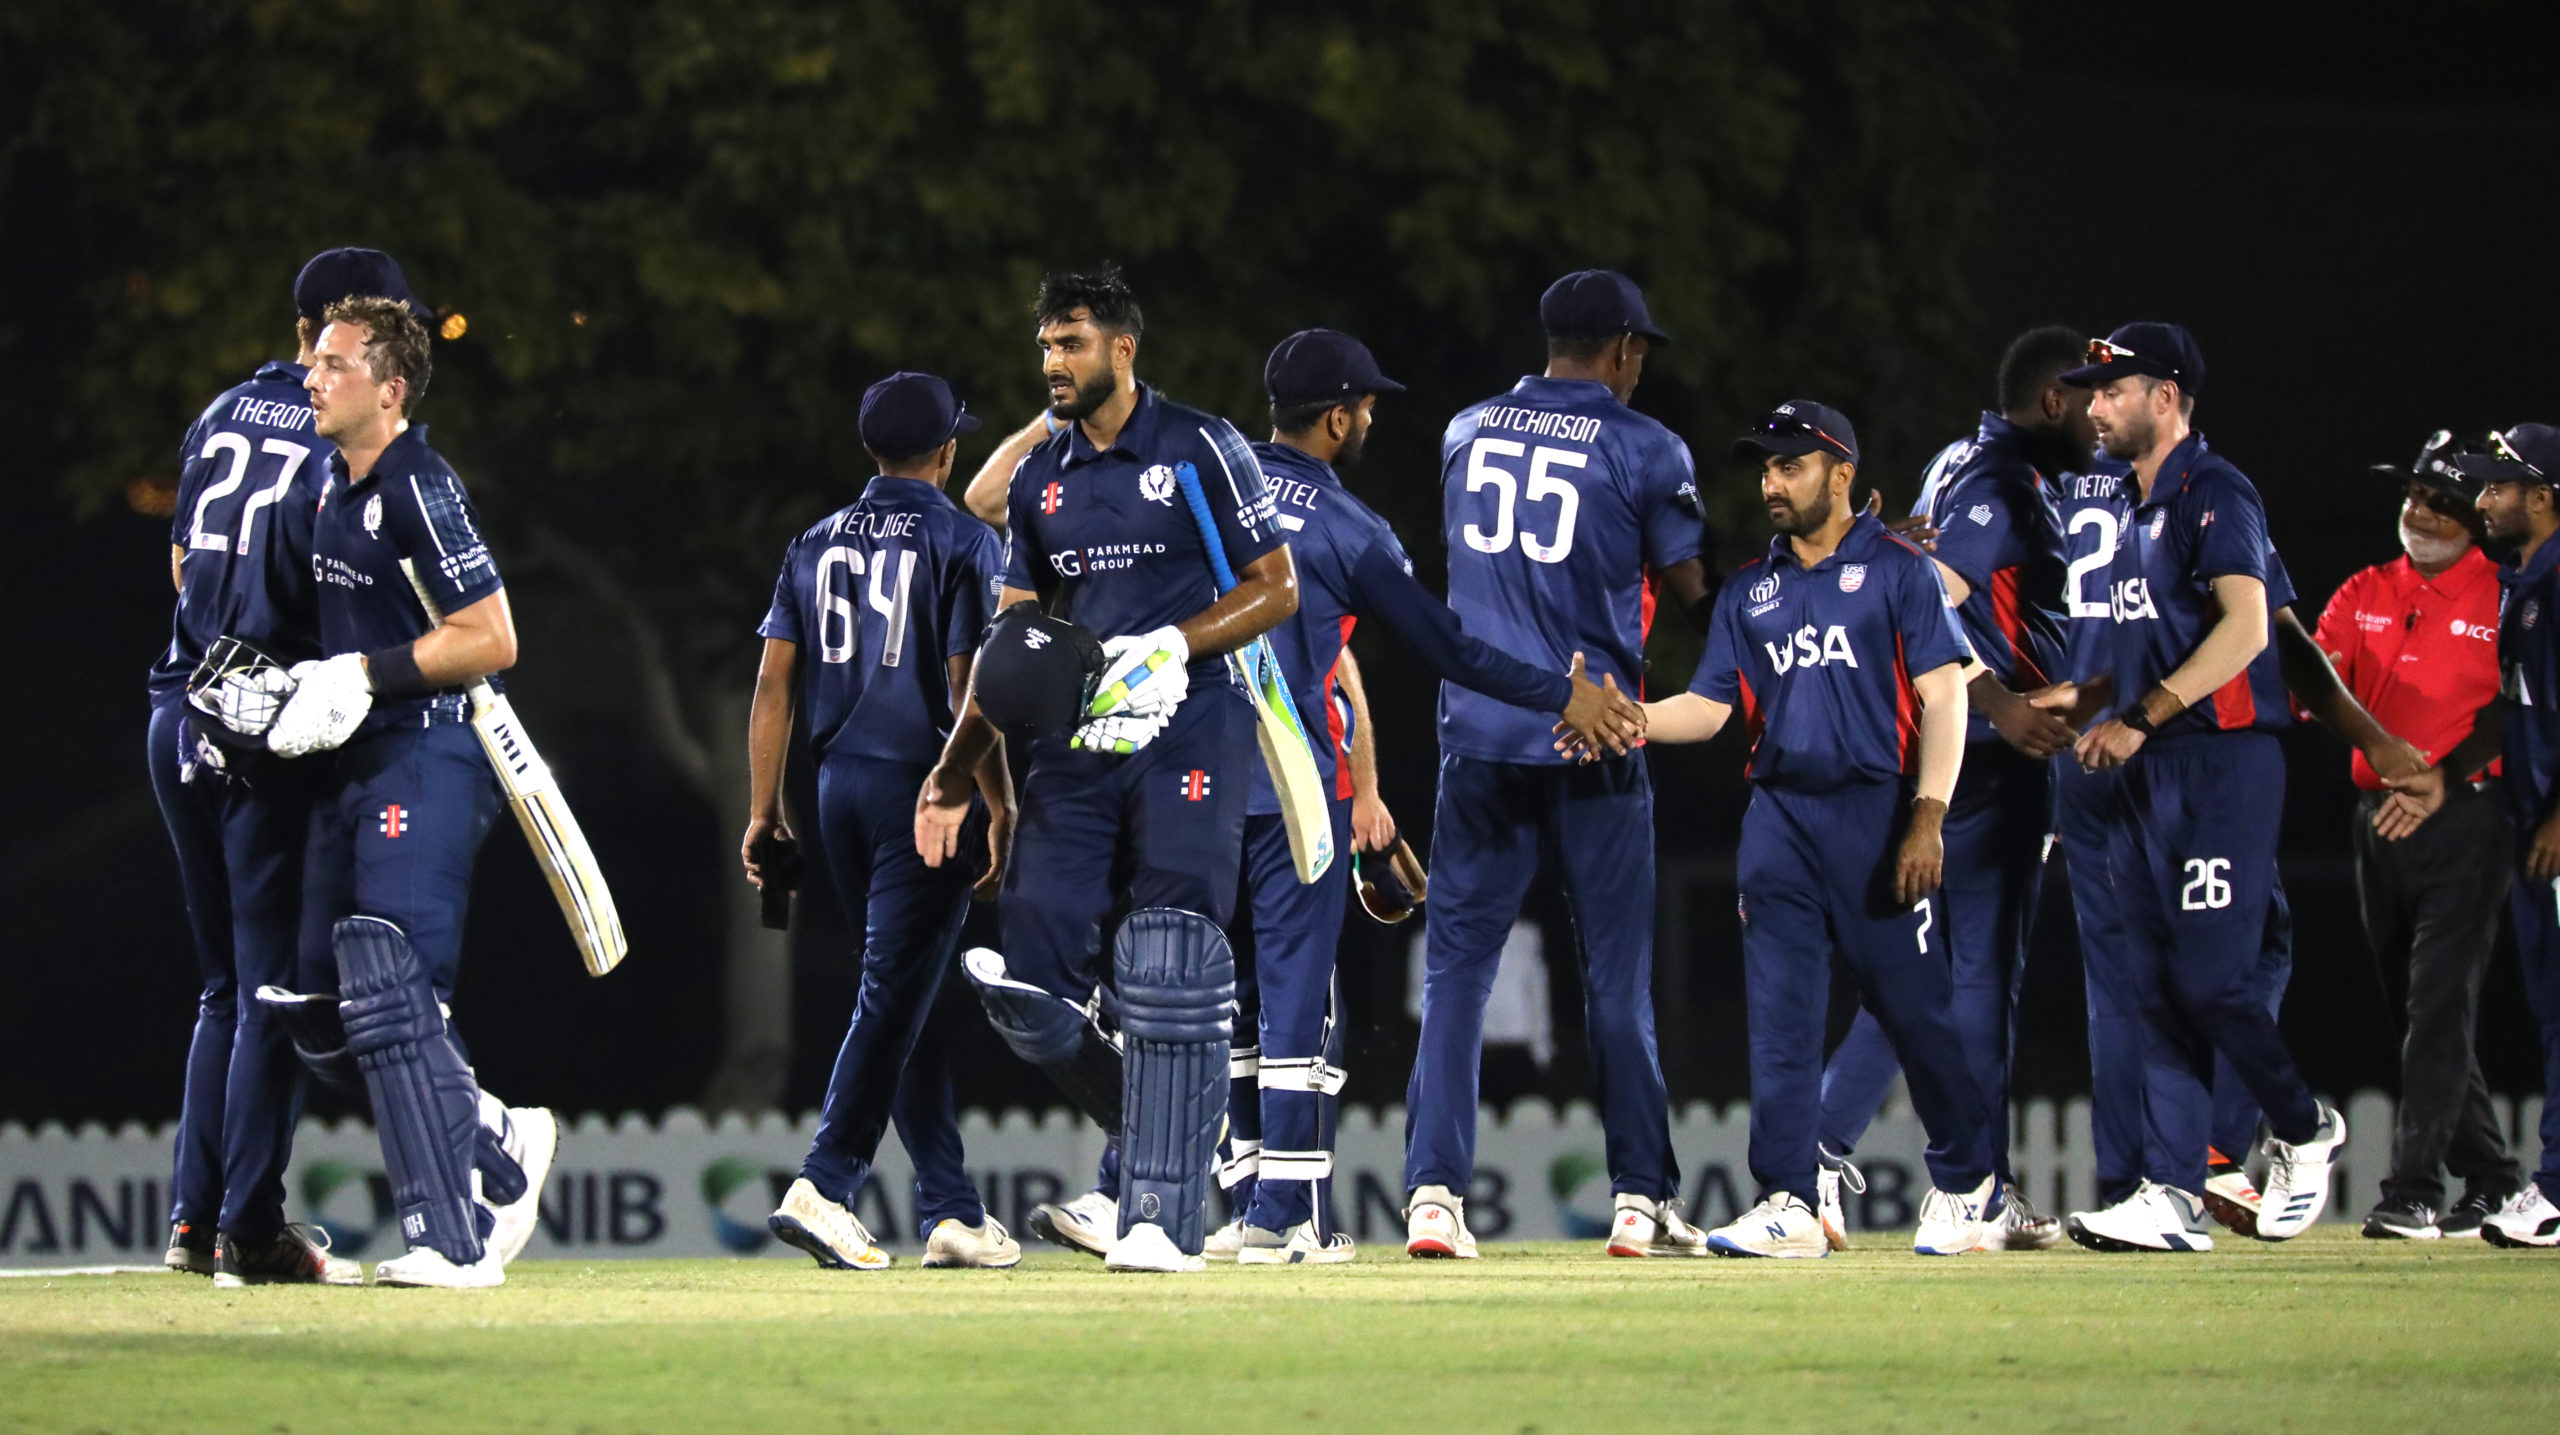 Josh Davey and Safyaan Sharif rescue Scotland to beat the USA